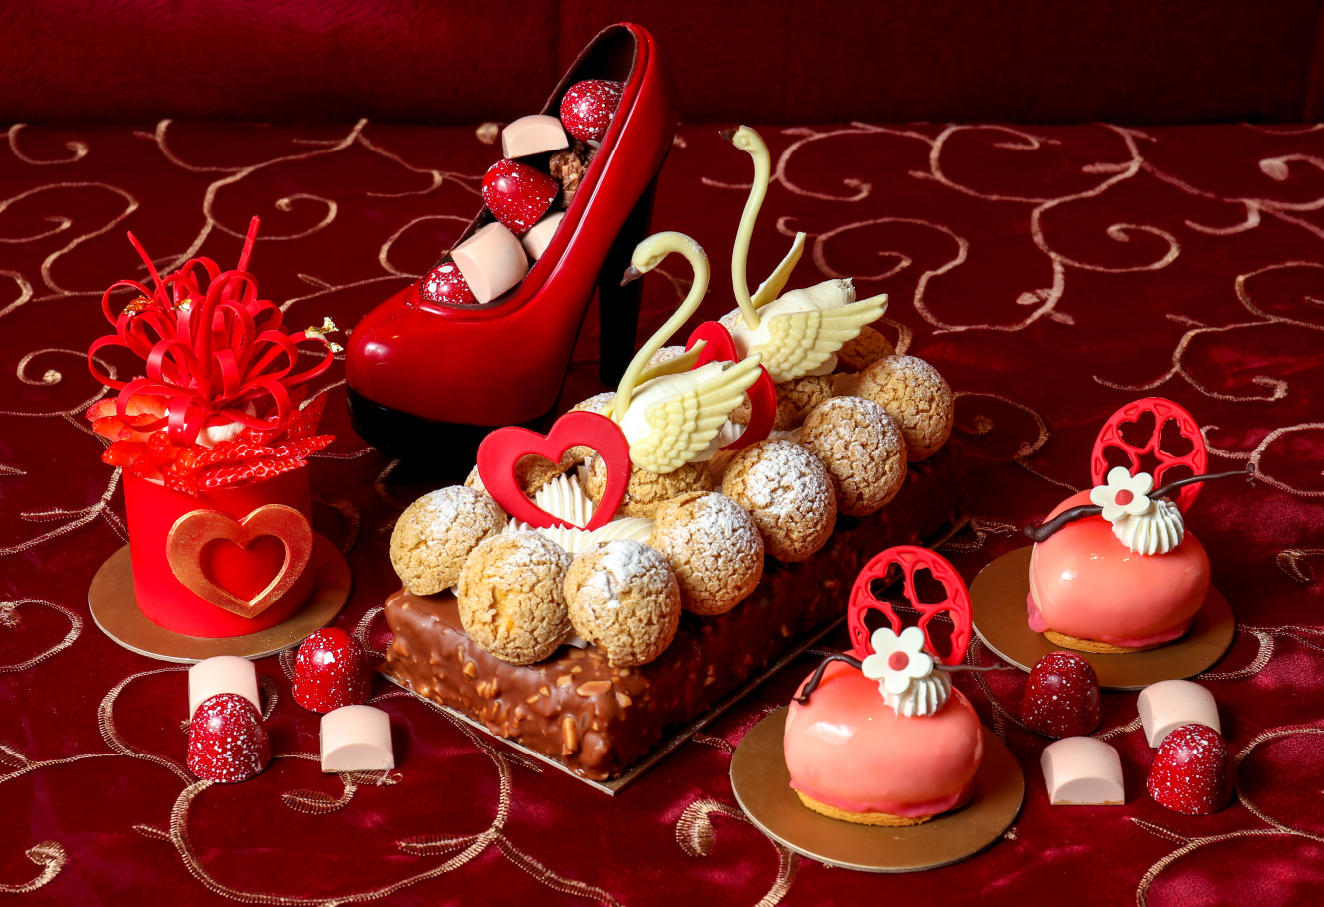 The photo shows a variety of Valentine's Day desserts.